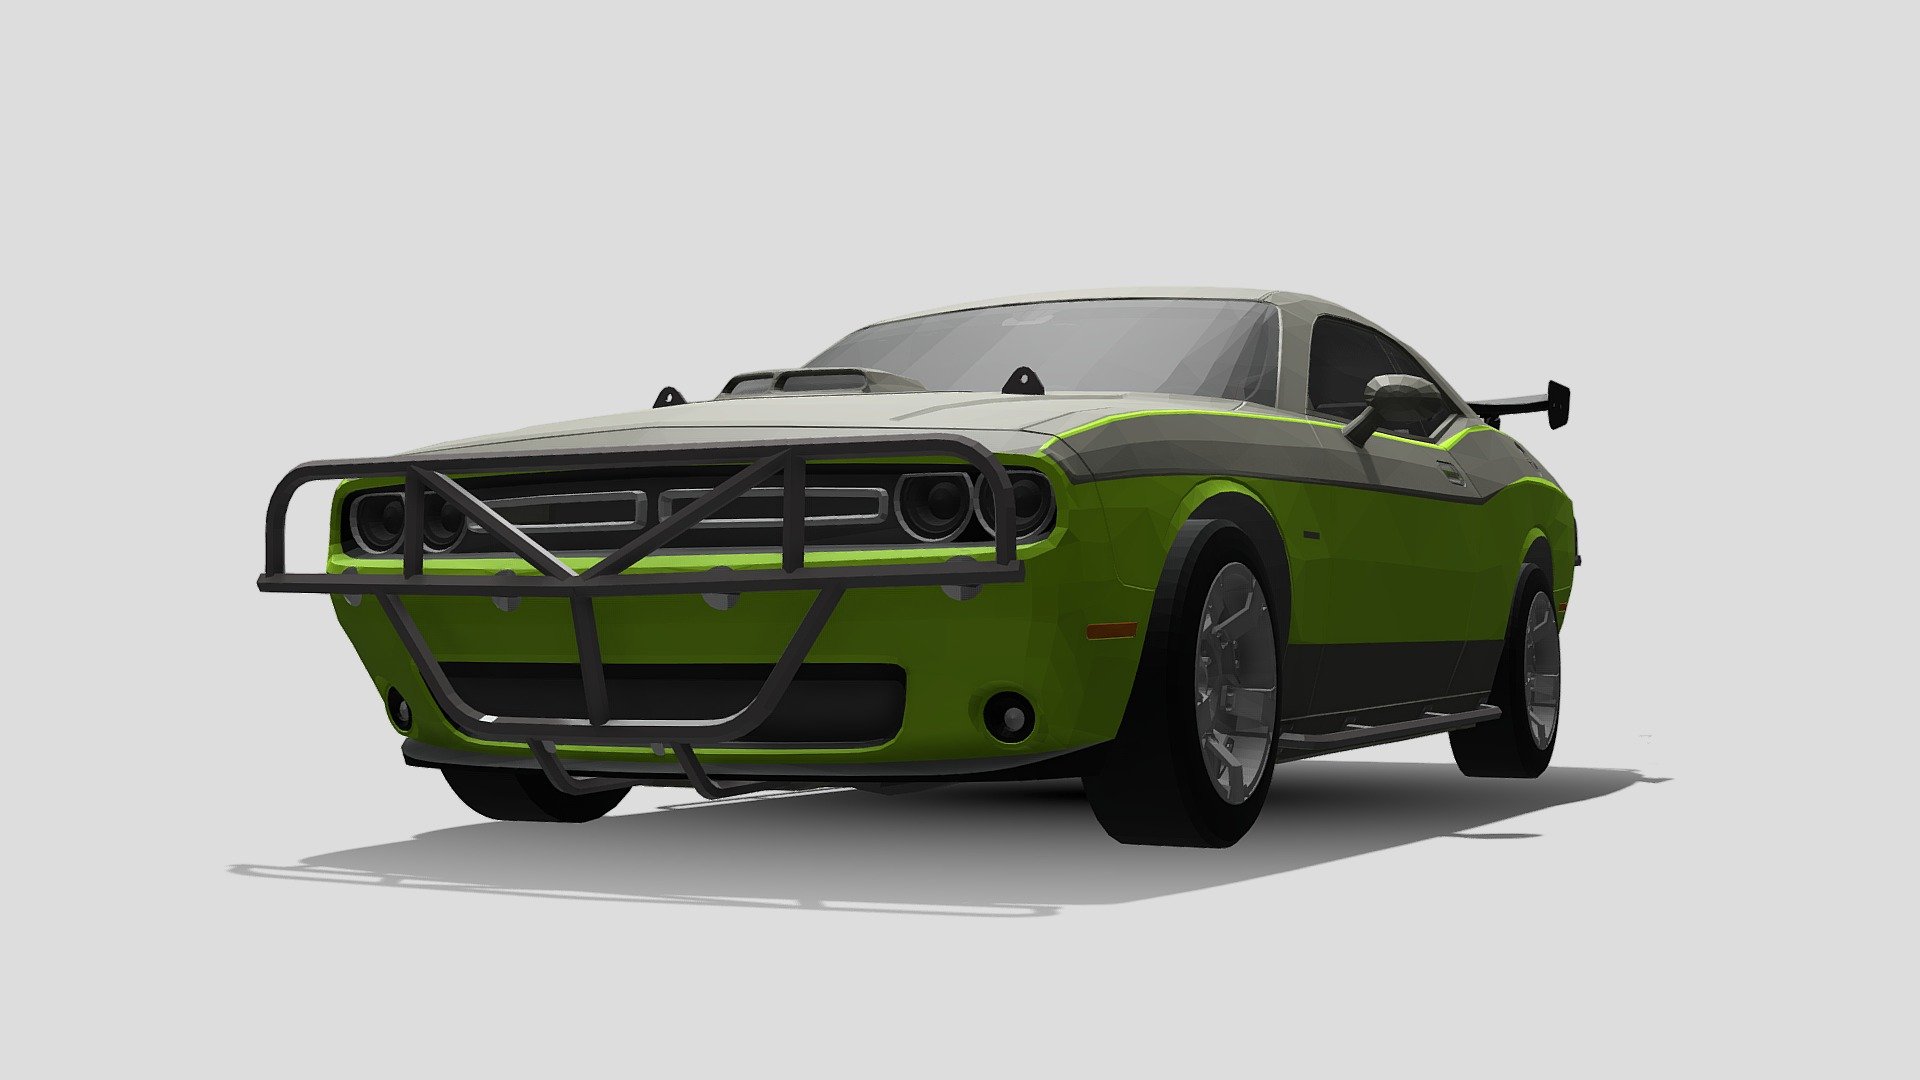 What challenger was used in Fast and Furious 7?
Dodge Chargers, Challengers and Jeeps to star in &lsquo;Furious 7'
2015 Dodge Challenger R/T
Dodge to roar through &lsquo;Furious 7'

The seventh installment of the wildly popular street-racing movie series will feature a candy red 2015 Dodge Charger, a green and black 2015 Dodge Challenger R/T and an armored 2015 Jeep Wrangler Unlimited.

In both The Fast and the Furious 5 and The Fast and the Furious 6 movies, you'll find Dominic Toretto driving a 2009 Dodge Challenger SRT-8 3d model